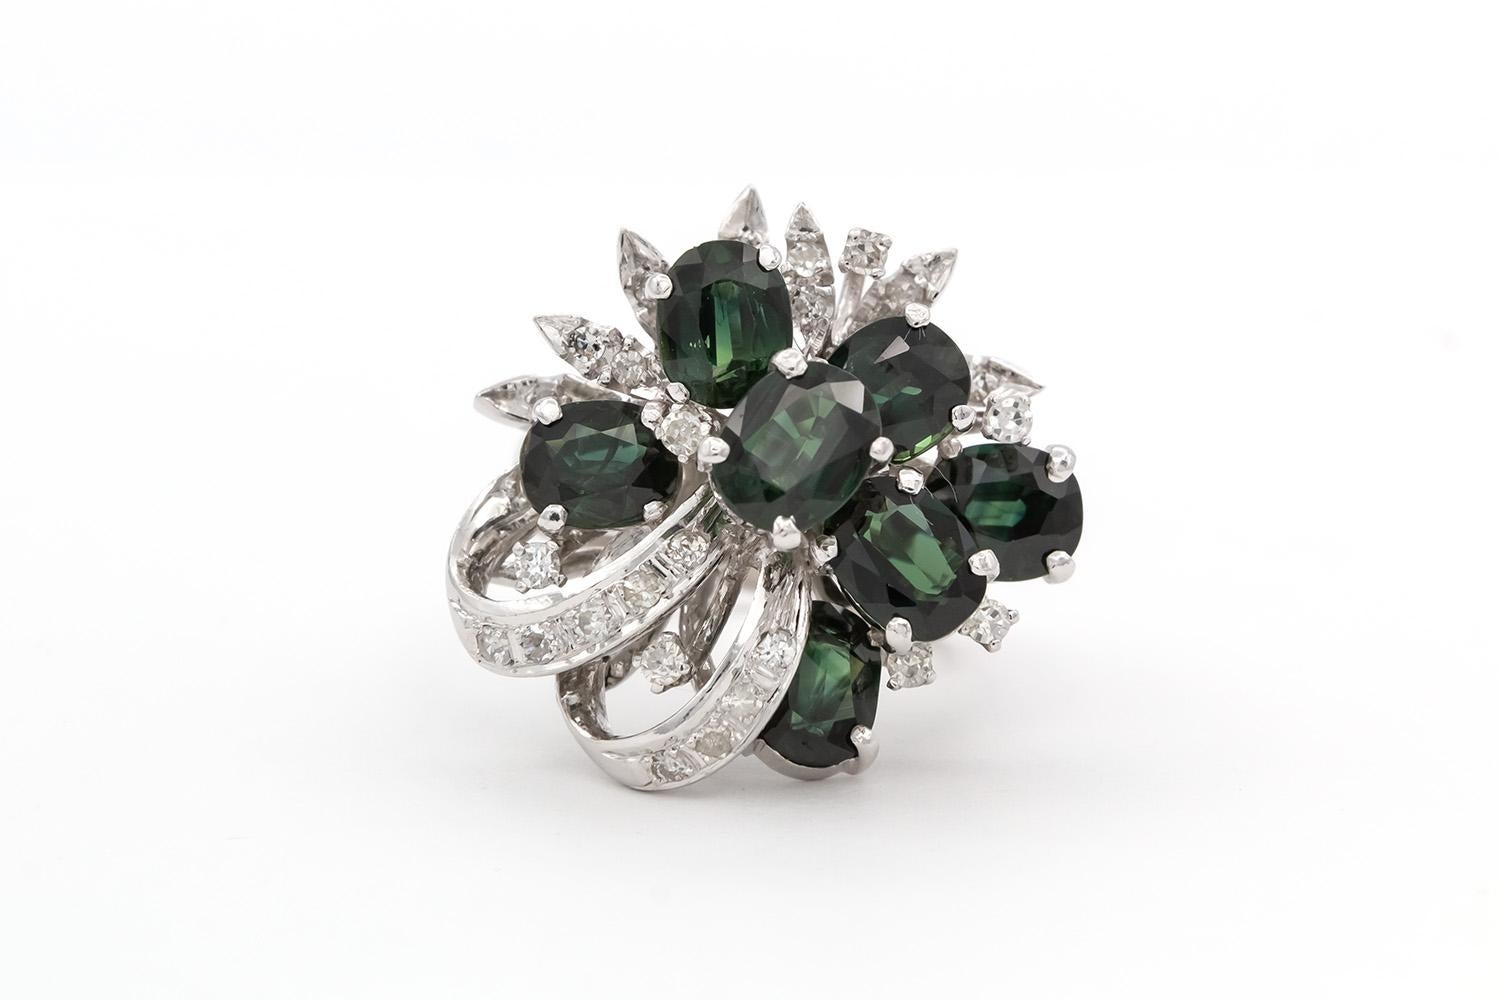 We are pleased to offer this GIA Certified No Heat Green-Blue Sapphire & Diamond 18k White Gold Cocktail Cluster Ring. This finely crafted piece features a cluster/ribbon design set with an estimated 8.00ctw GIA certified oval cut green-blue